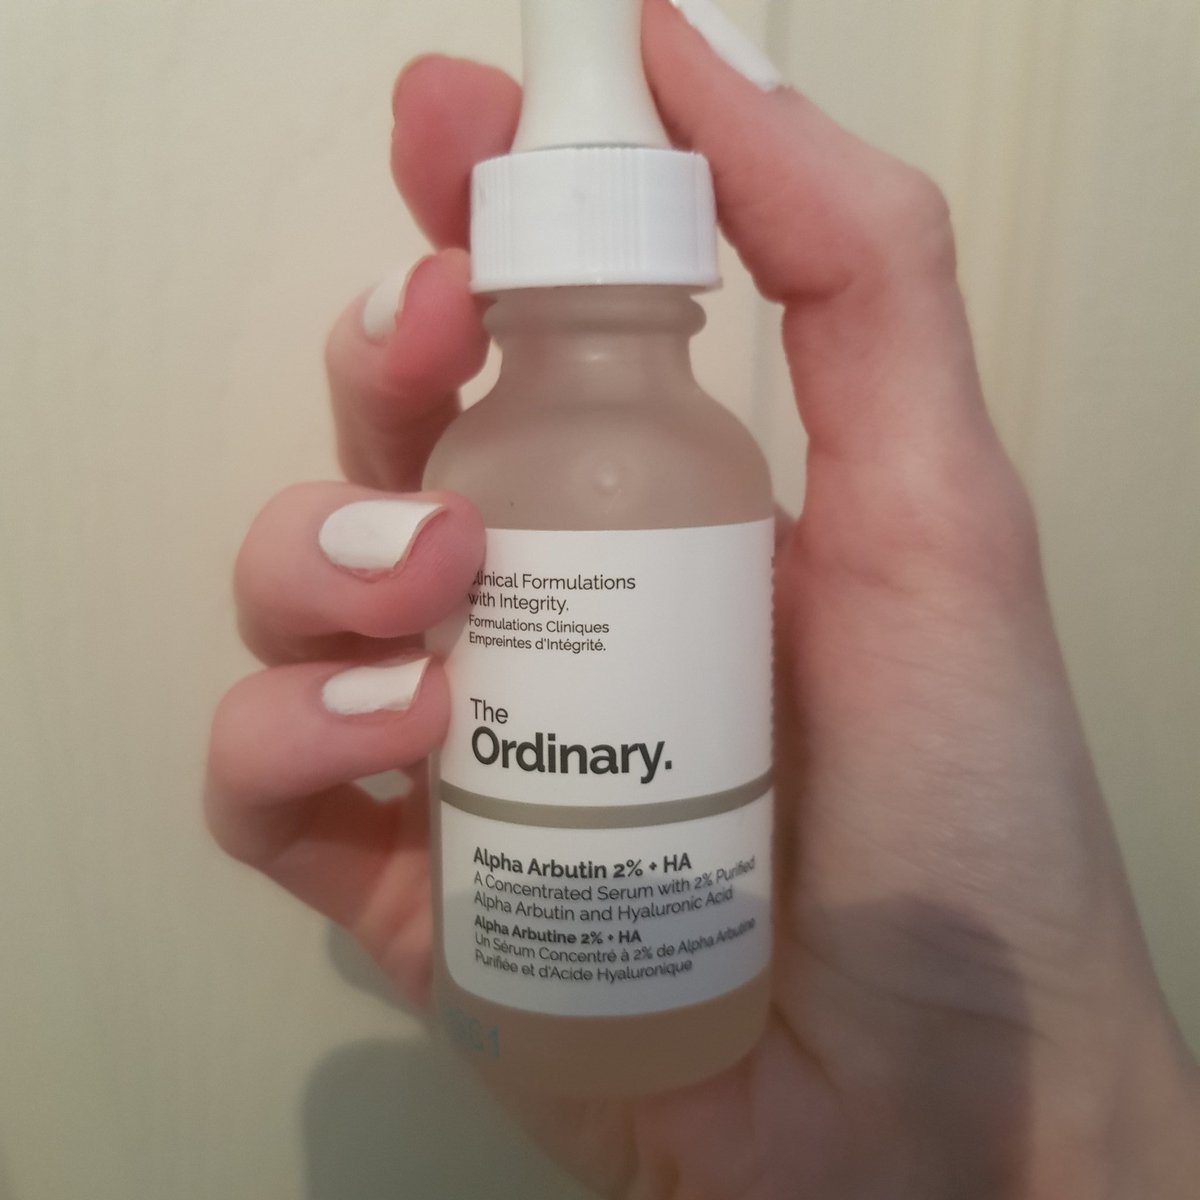 15.3.2020: three okay things • watching Midsommar with Marley (it's now on Prime!) • some spring-coloured tulips to brighten my bedroom • The Ordinary Alpha Arbutin serum saving me from angry stress-acne  #threeokthings  #seekingsunshine